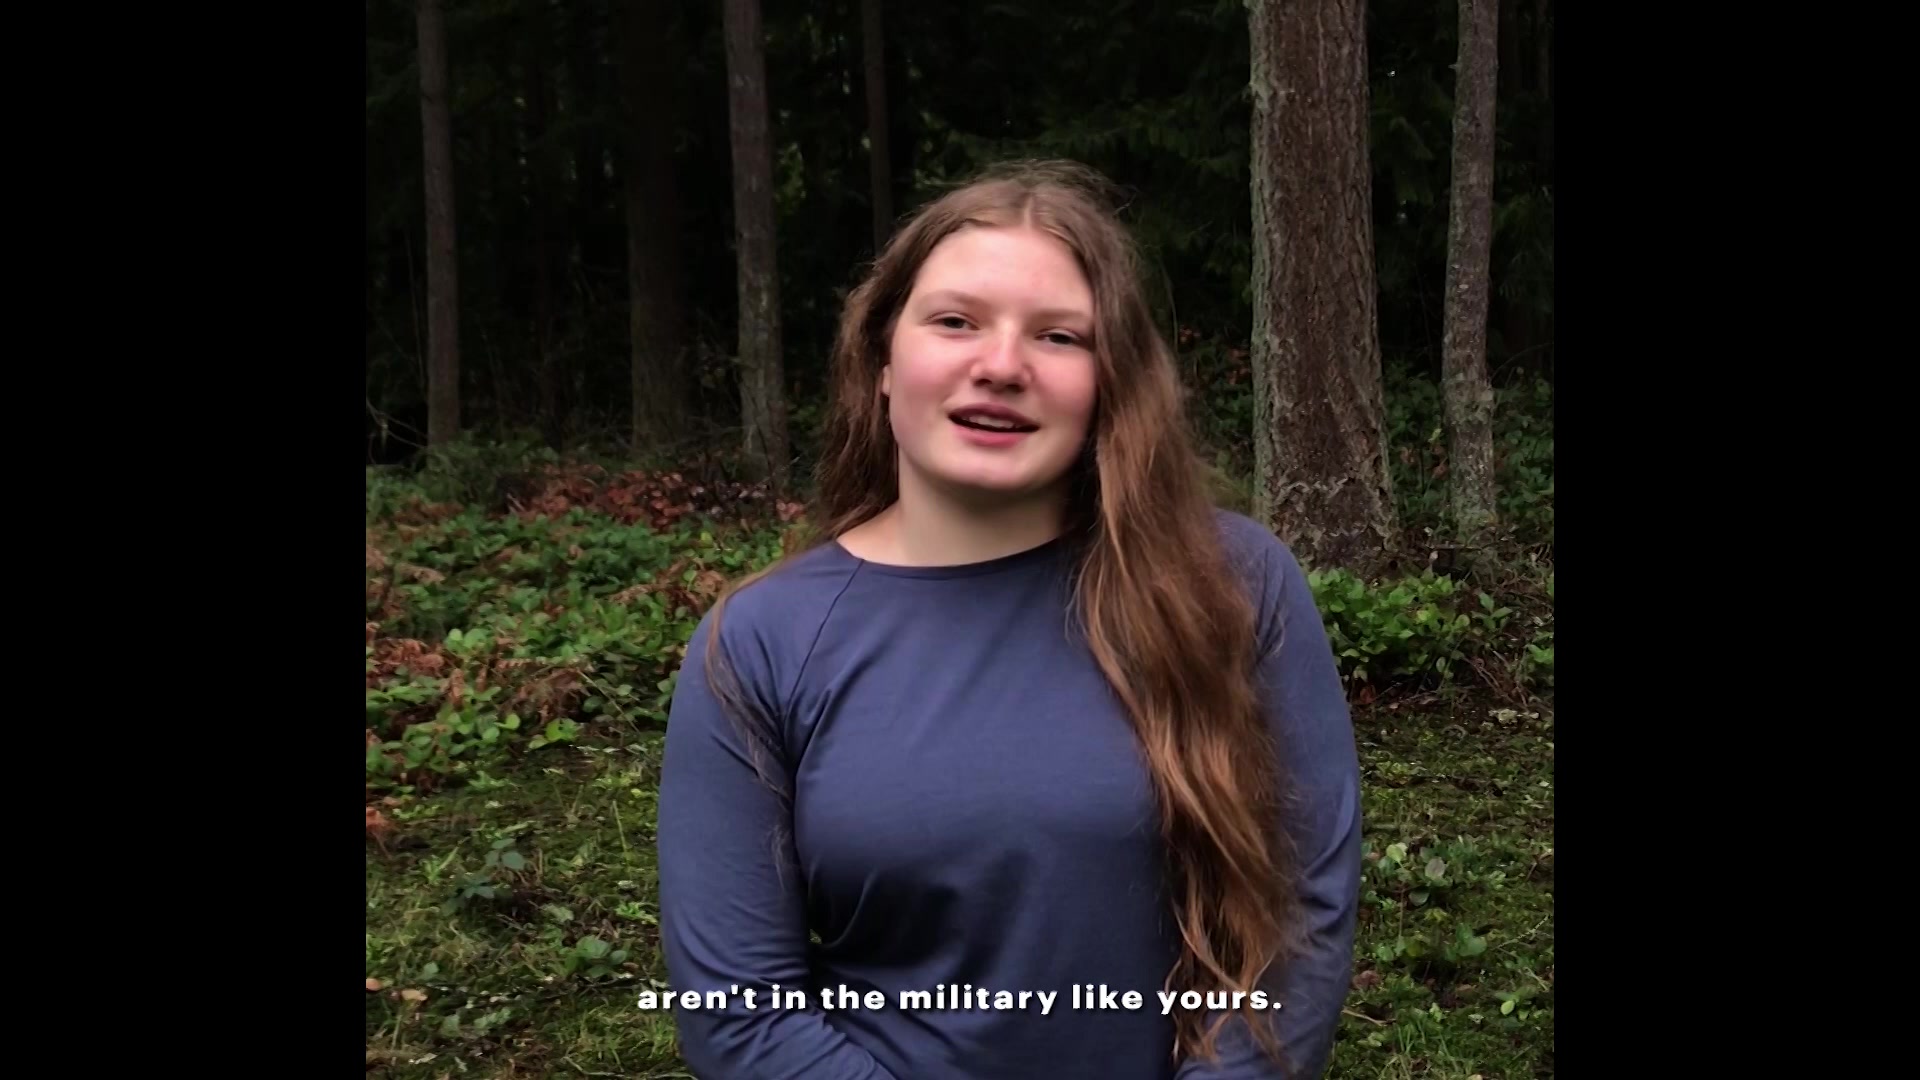 Meet Mackenzie, who shares her perspective about what it is like to be a mighty military kid in honor of the Month of the Military Child in April. For more, visit: militarykidsconnect.health.mil